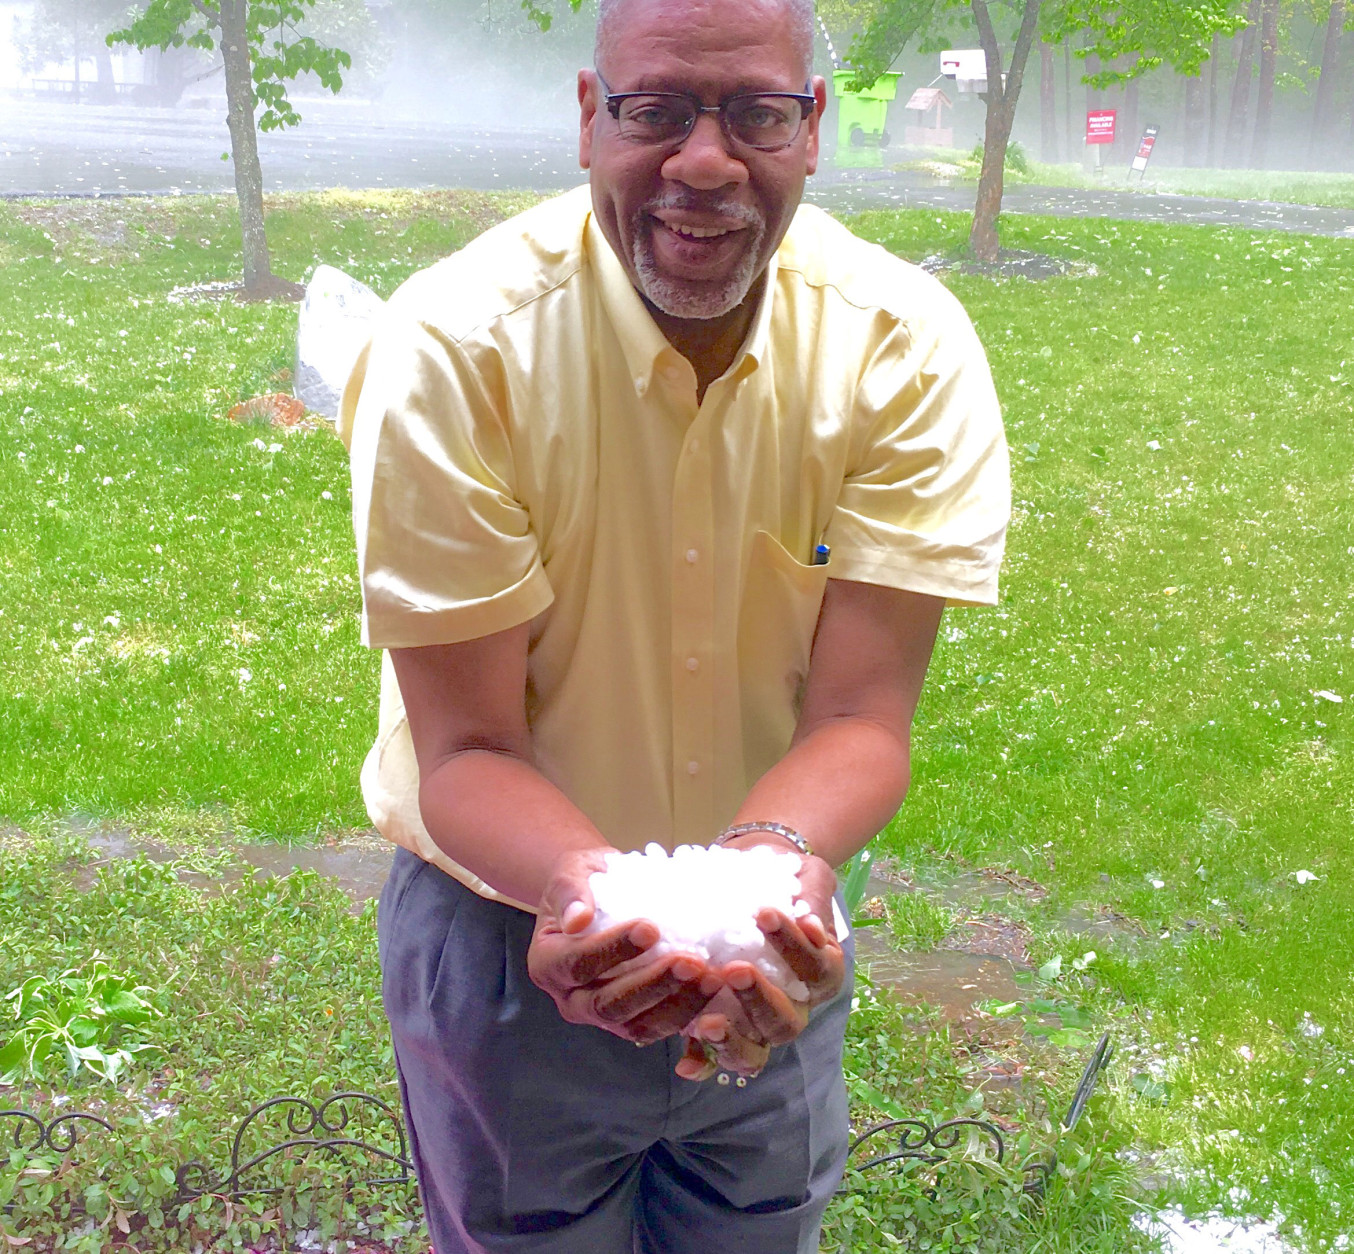 "No, this is not snow." WTOP listener Charles Penn scoops up some hail in Manassas, Virginia around 6:20 p.m. Monday. (Courtesy Charles Penn)